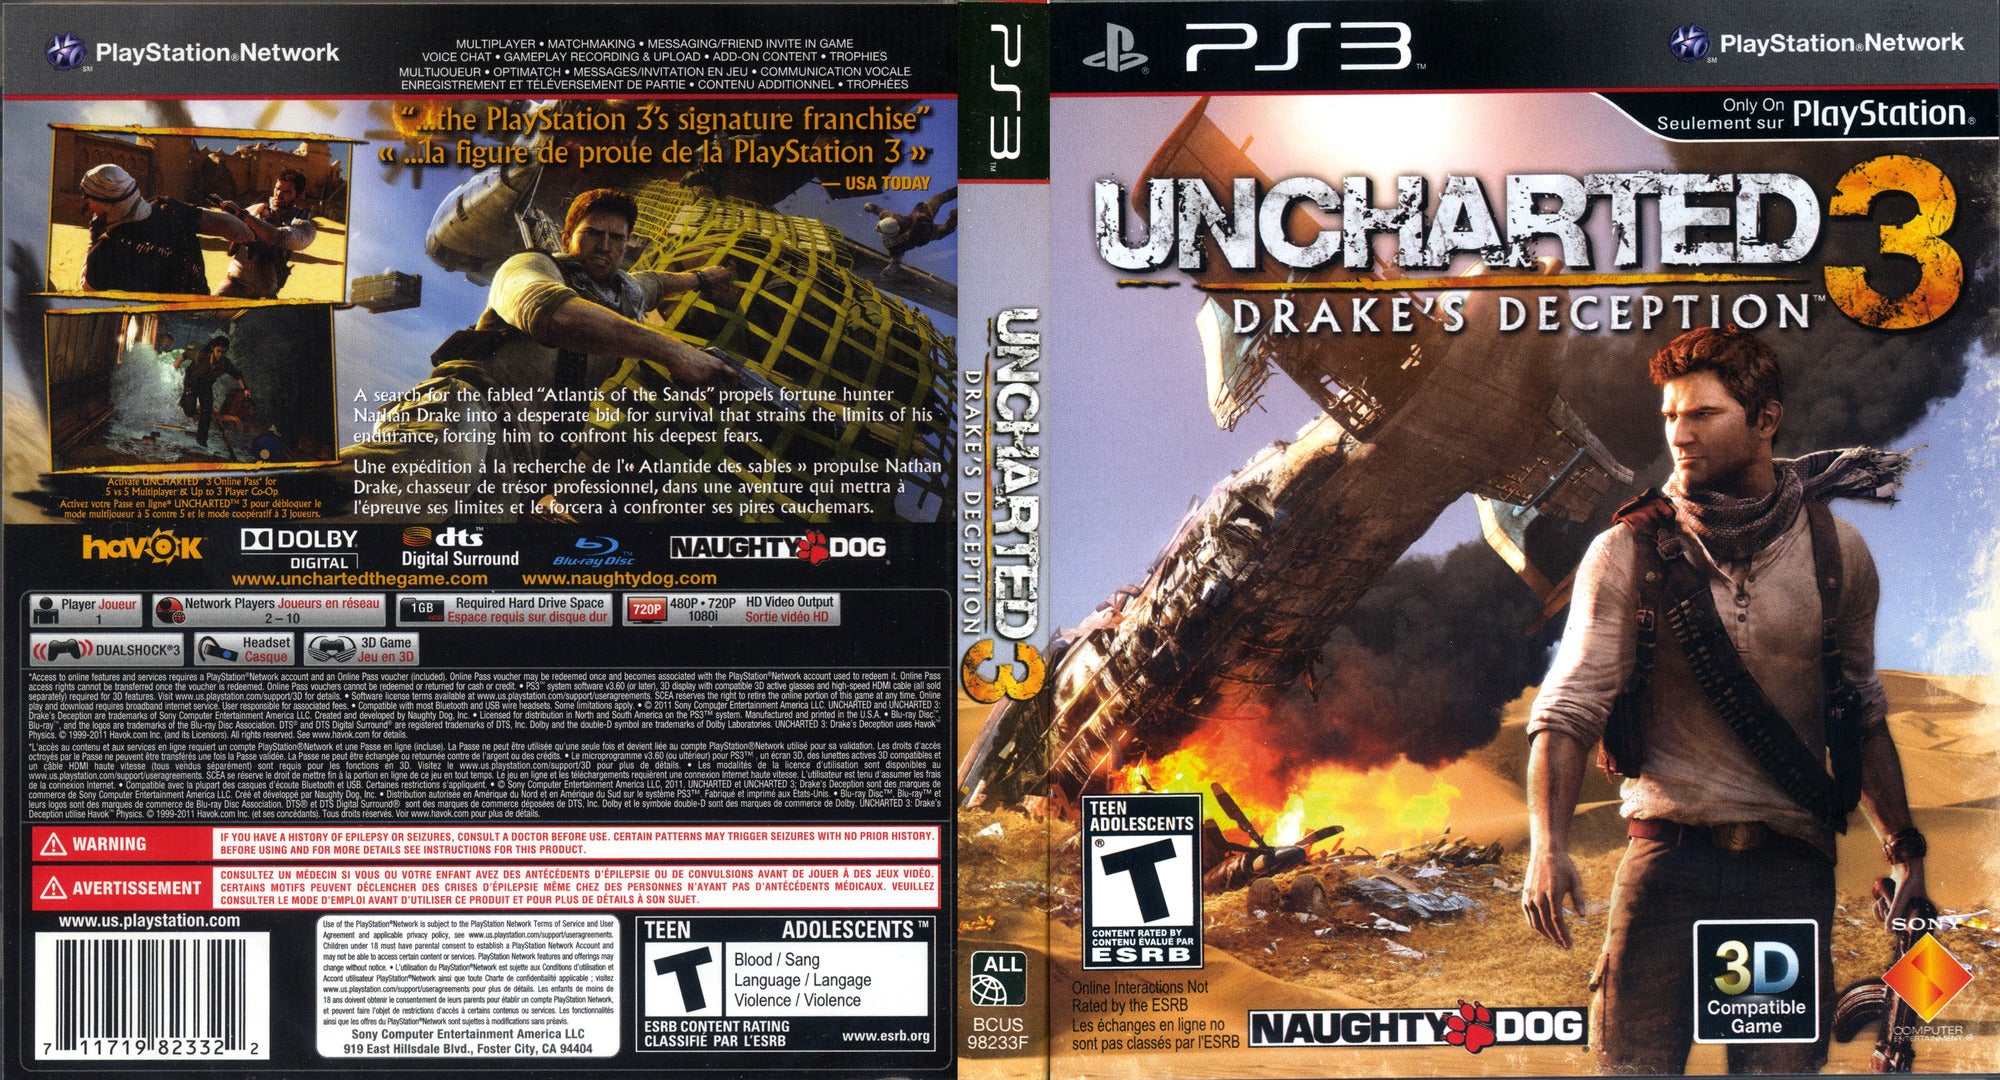 Ps3 - Uncharted 3 Drake's Deception NFR Case Sony PlayStation 3 Comple –  vandalsgaming